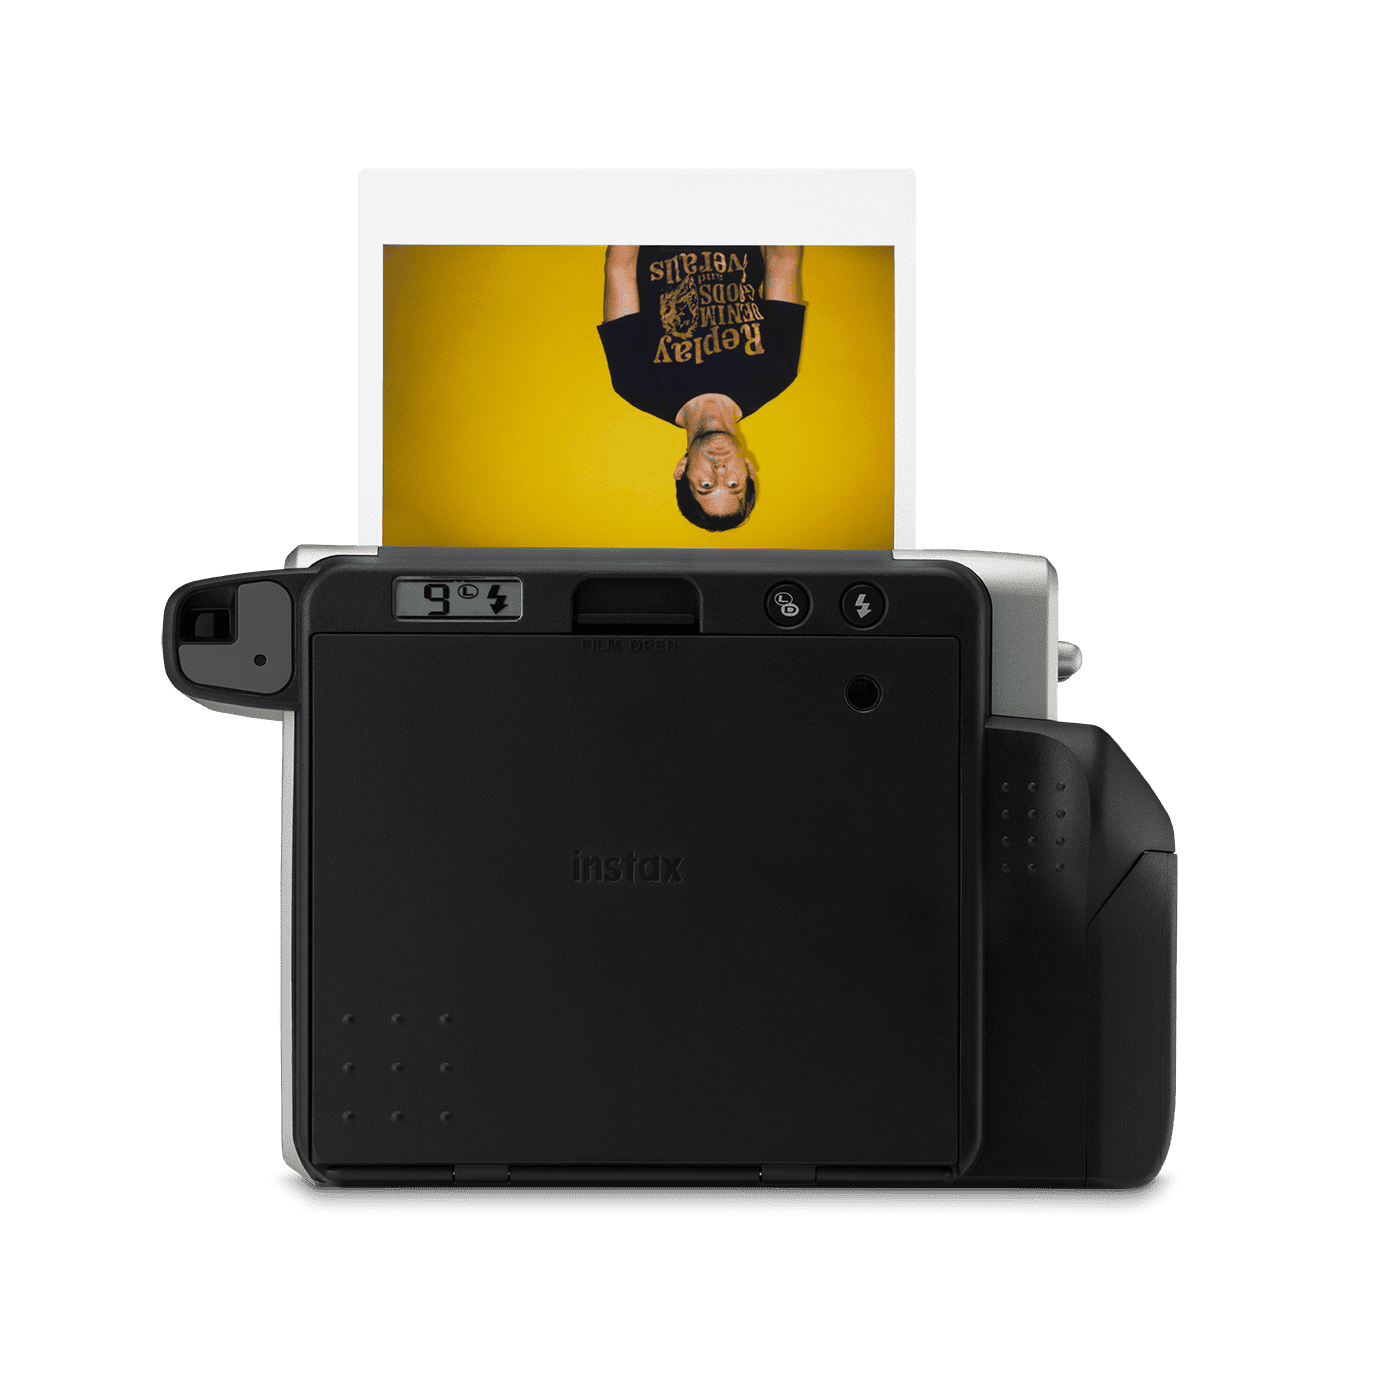 WIDE 300 Instant Camera | instax by Fujifilm Photography